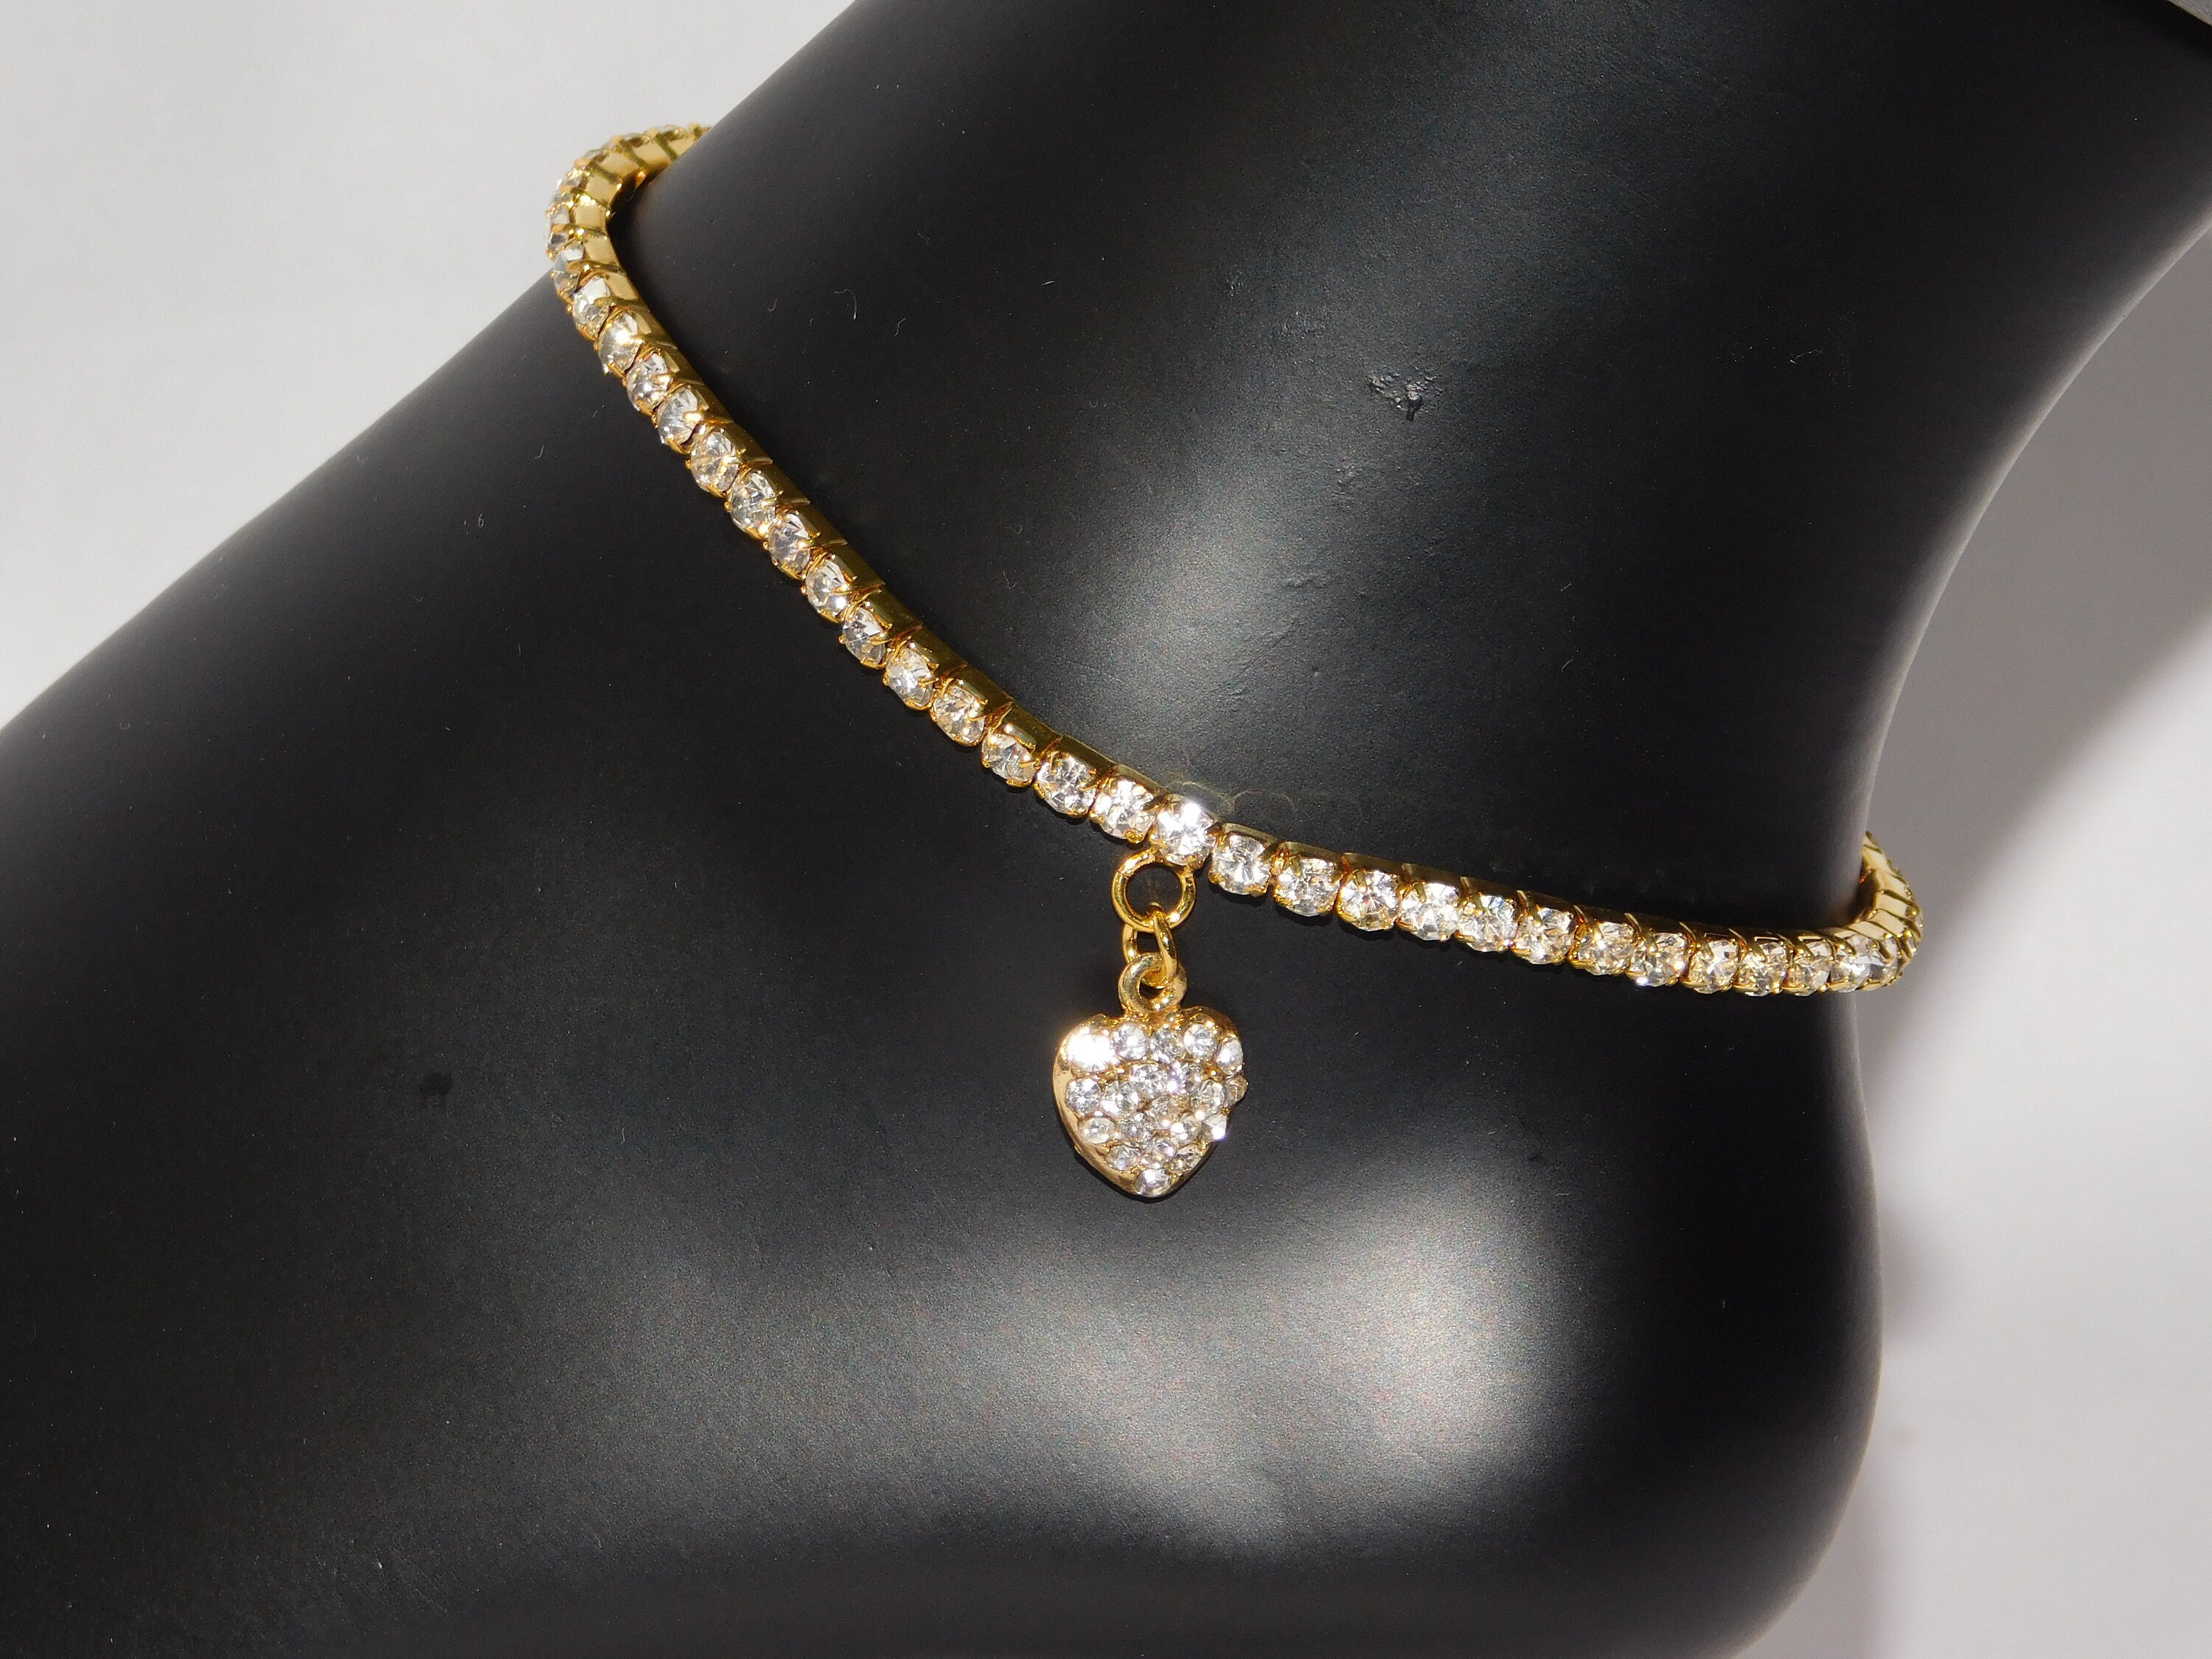 Clear Crystal Rhinestone LOVE HEART Charm Anklet barefoot Bridal jewellery